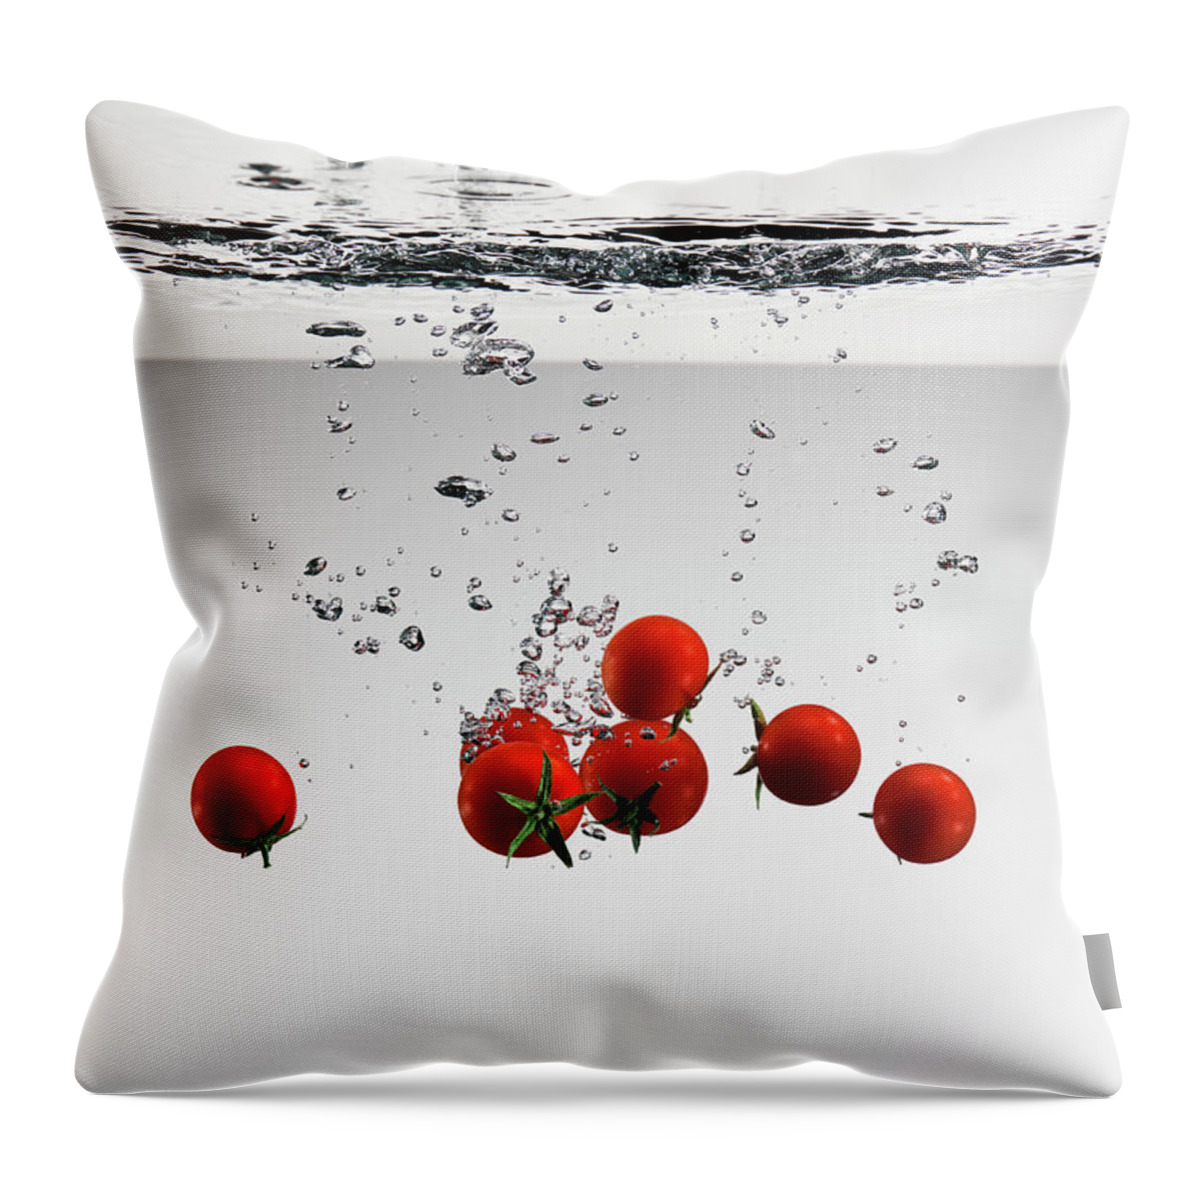 Underwater Throw Pillow featuring the photograph Tomatoes Falling Into Water by Pier